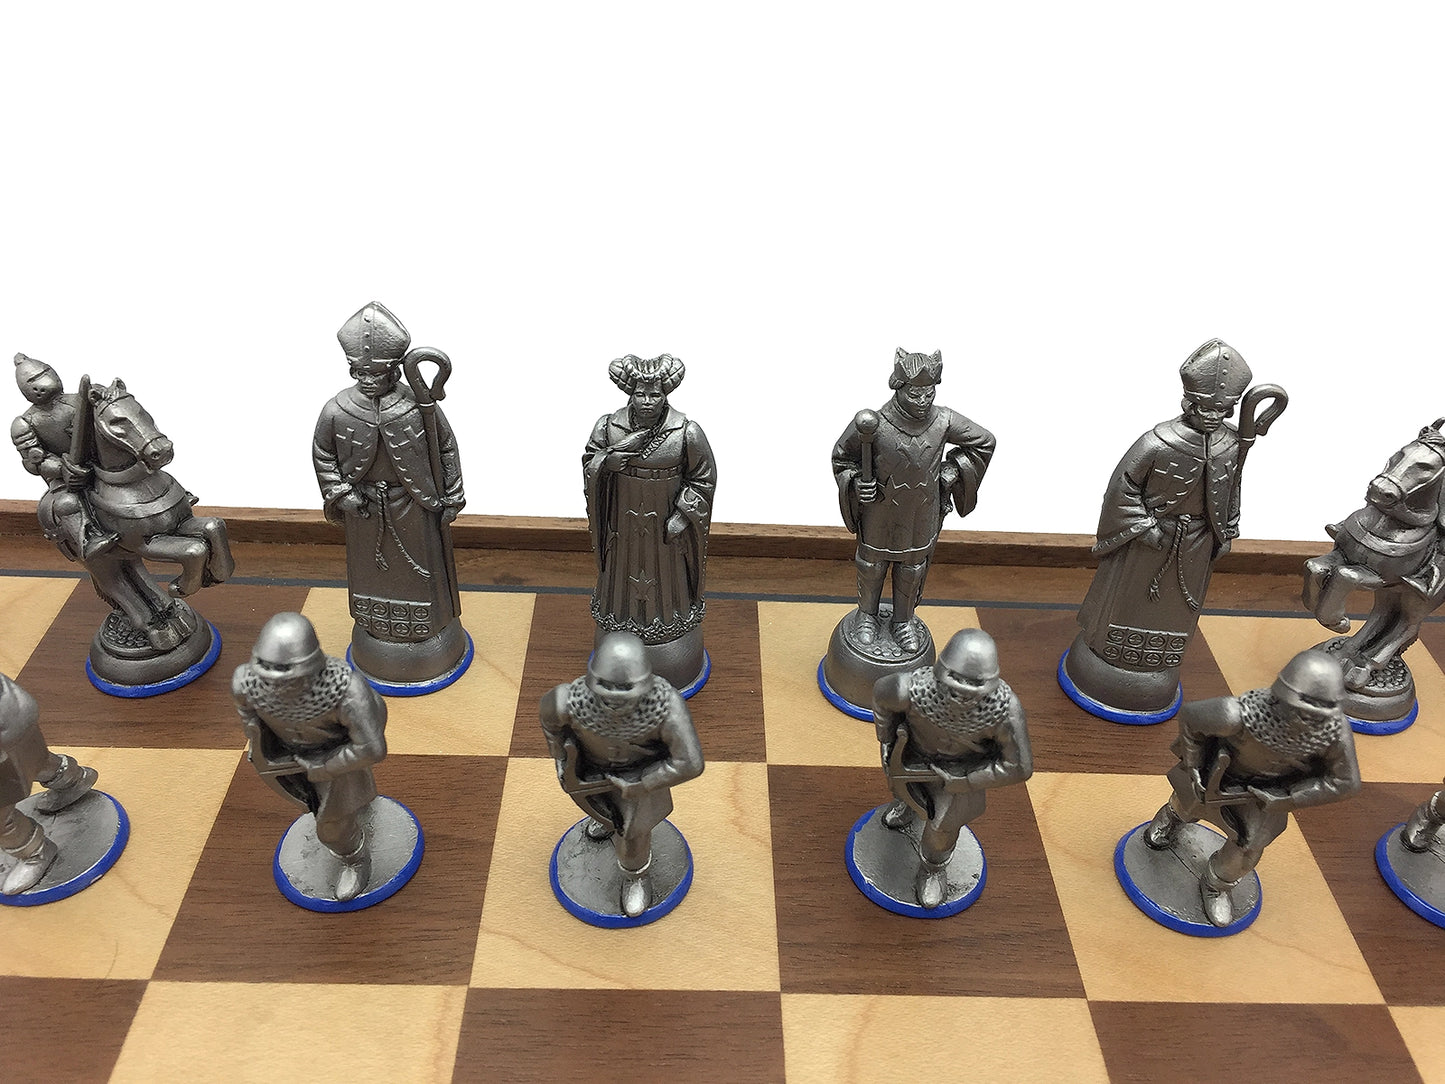 Toy soldier miniature army men Medieval Battle of Agincourt Chess Set.